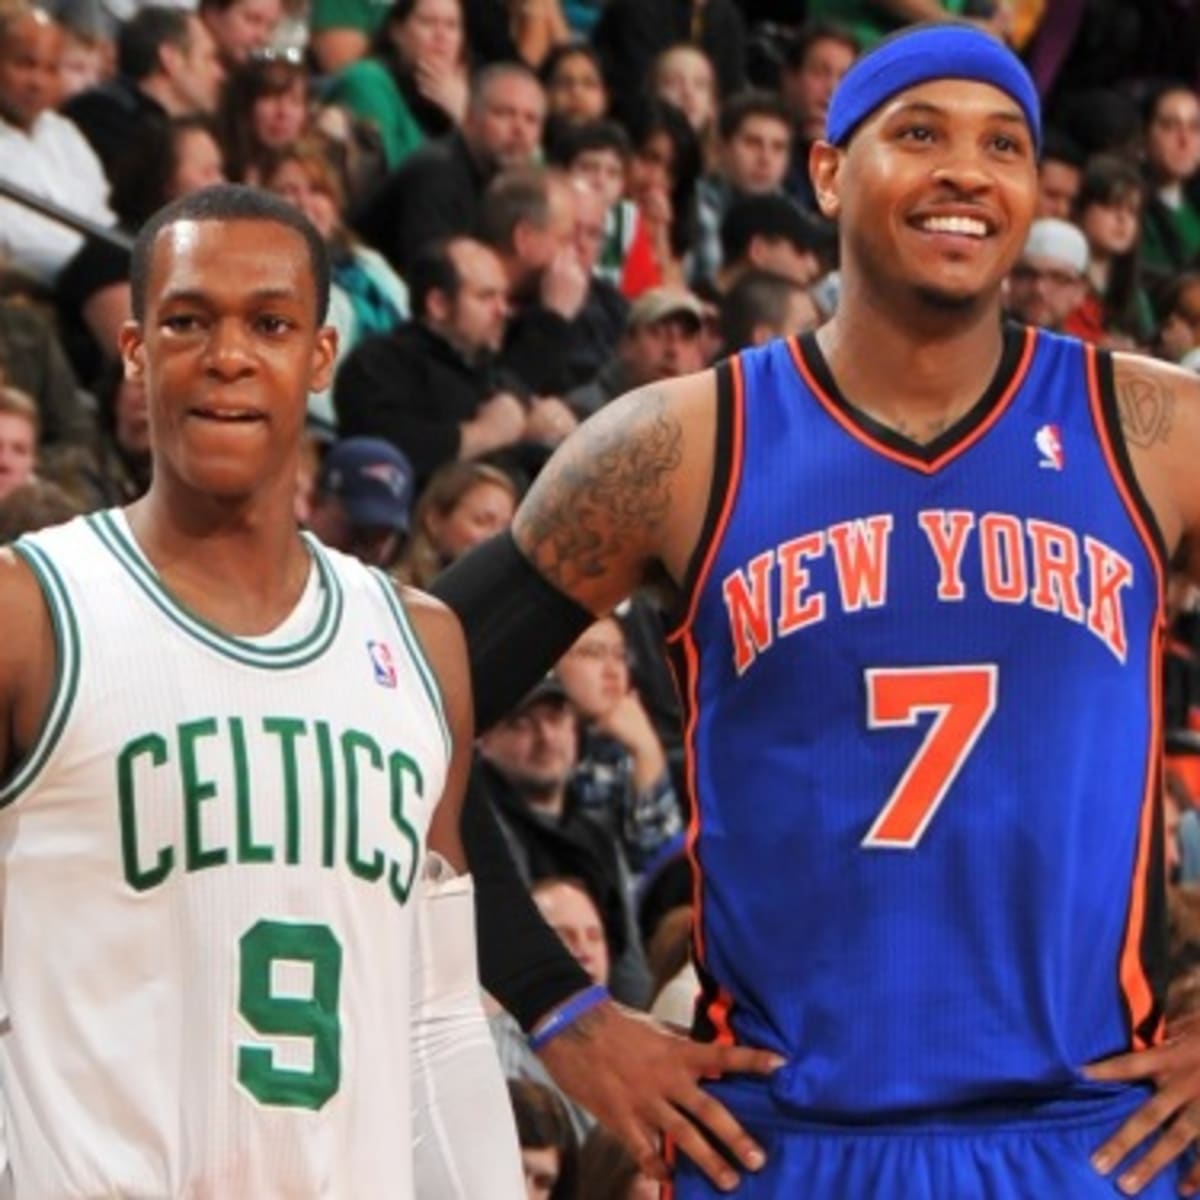 Report: Knicks have reached out to Boston on Carmelo Anthony trade